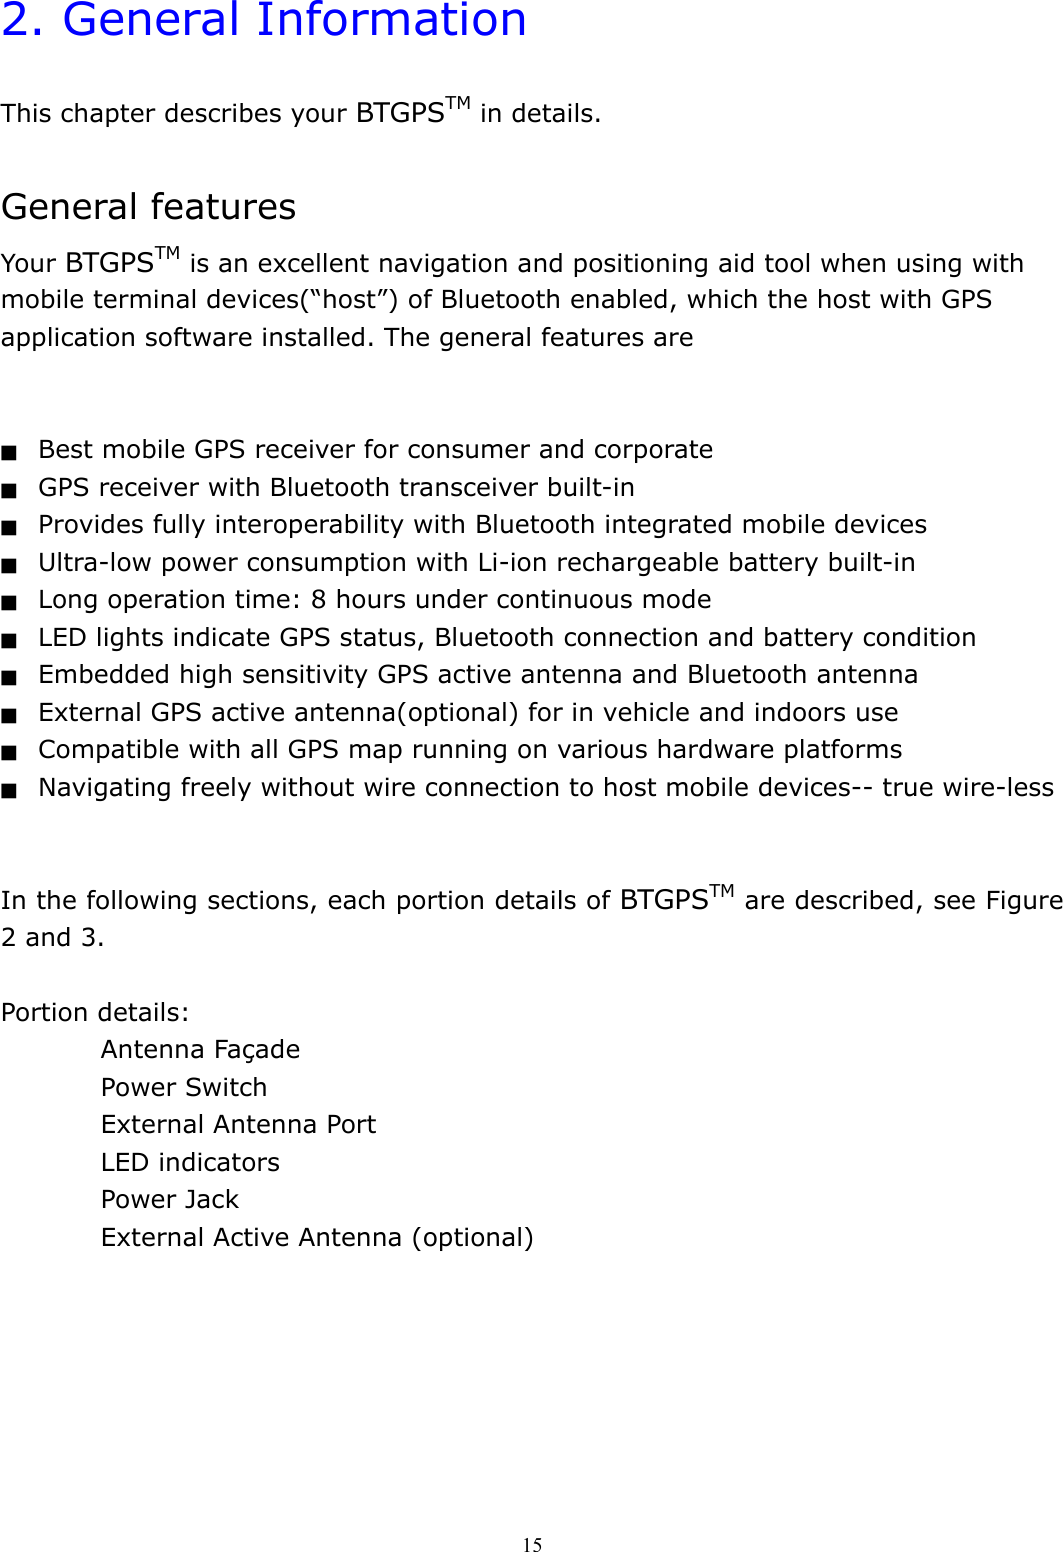  152. General Information  This chapter describes your BTGPSTM in details.  General features Your BTGPSTM is an excellent navigation and positioning aid tool when using with mobile terminal devices(“host”) of Bluetooth enabled, which the host with GPS application software installed. The general features are   ■  Best mobile GPS receiver for consumer and corporate ■  GPS receiver with Bluetooth transceiver built-in ■  Provides fully interoperability with Bluetooth integrated mobile devices ■  Ultra-low power consumption with Li-ion rechargeable battery built-in ■  Long operation time: 8 hours under continuous mode ■  LED lights indicate GPS status, Bluetooth connection and battery condition ■  Embedded high sensitivity GPS active antenna and Bluetooth antenna ■  External GPS active antenna(optional) for in vehicle and indoors use ■  Compatible with all GPS map running on various hardware platforms ■  Navigating freely without wire connection to host mobile devices-- true wire-less   In the following sections, each portion details of BTGPSTM are described, see Figure 2 and 3.  Portion details: Antenna Façade Power Switch External Antenna Port LED indicators Power Jack External Active Antenna (optional)   